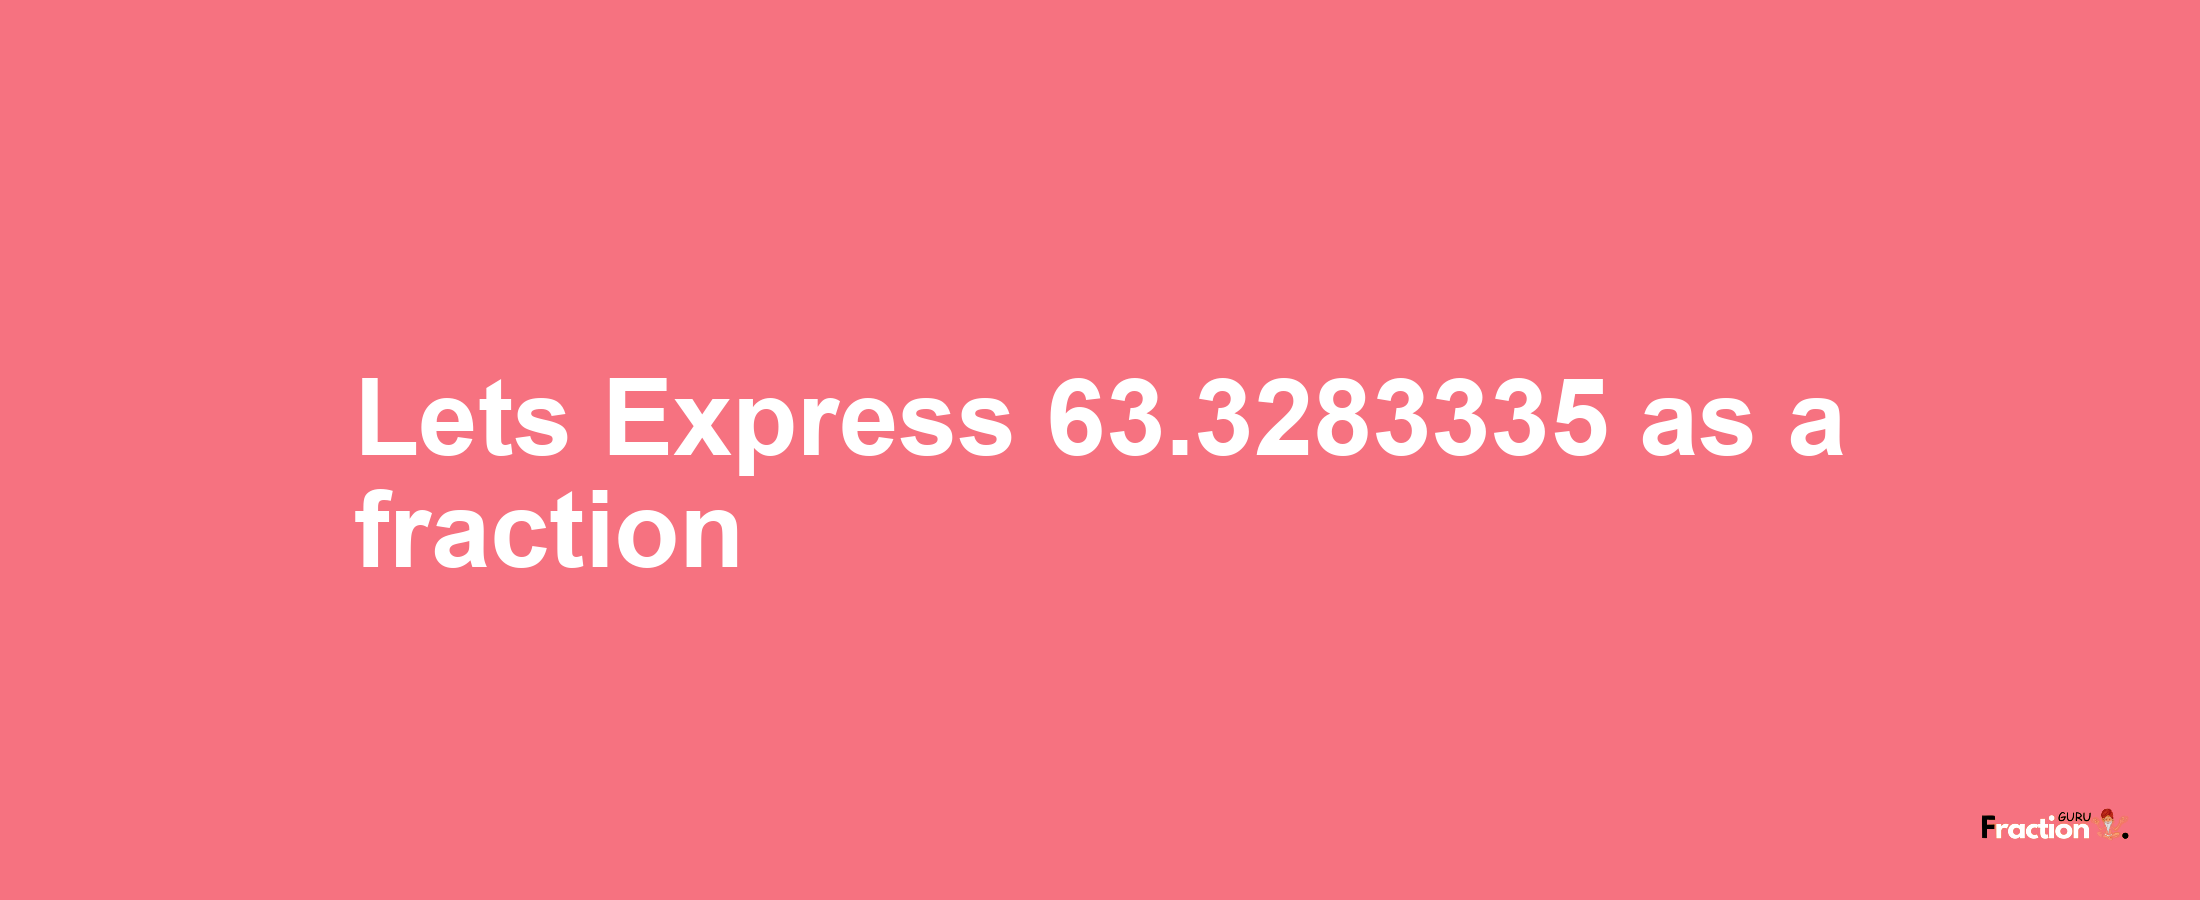 Lets Express 63.3283335 as afraction